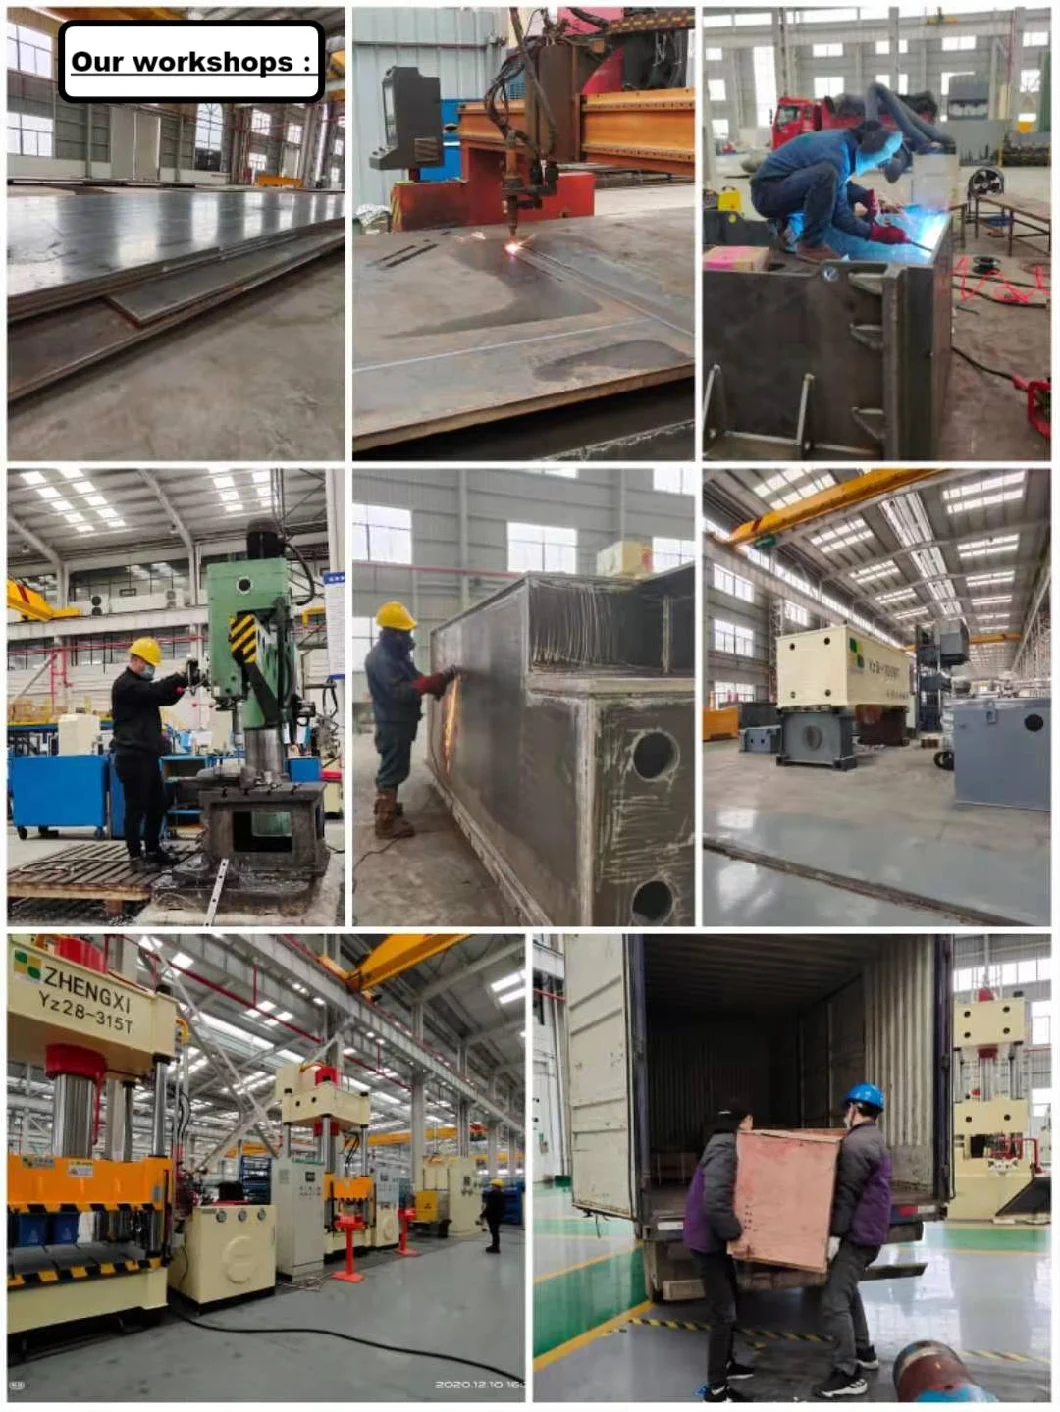 Polymer Materials Well Cover Hydraulic Press Machine